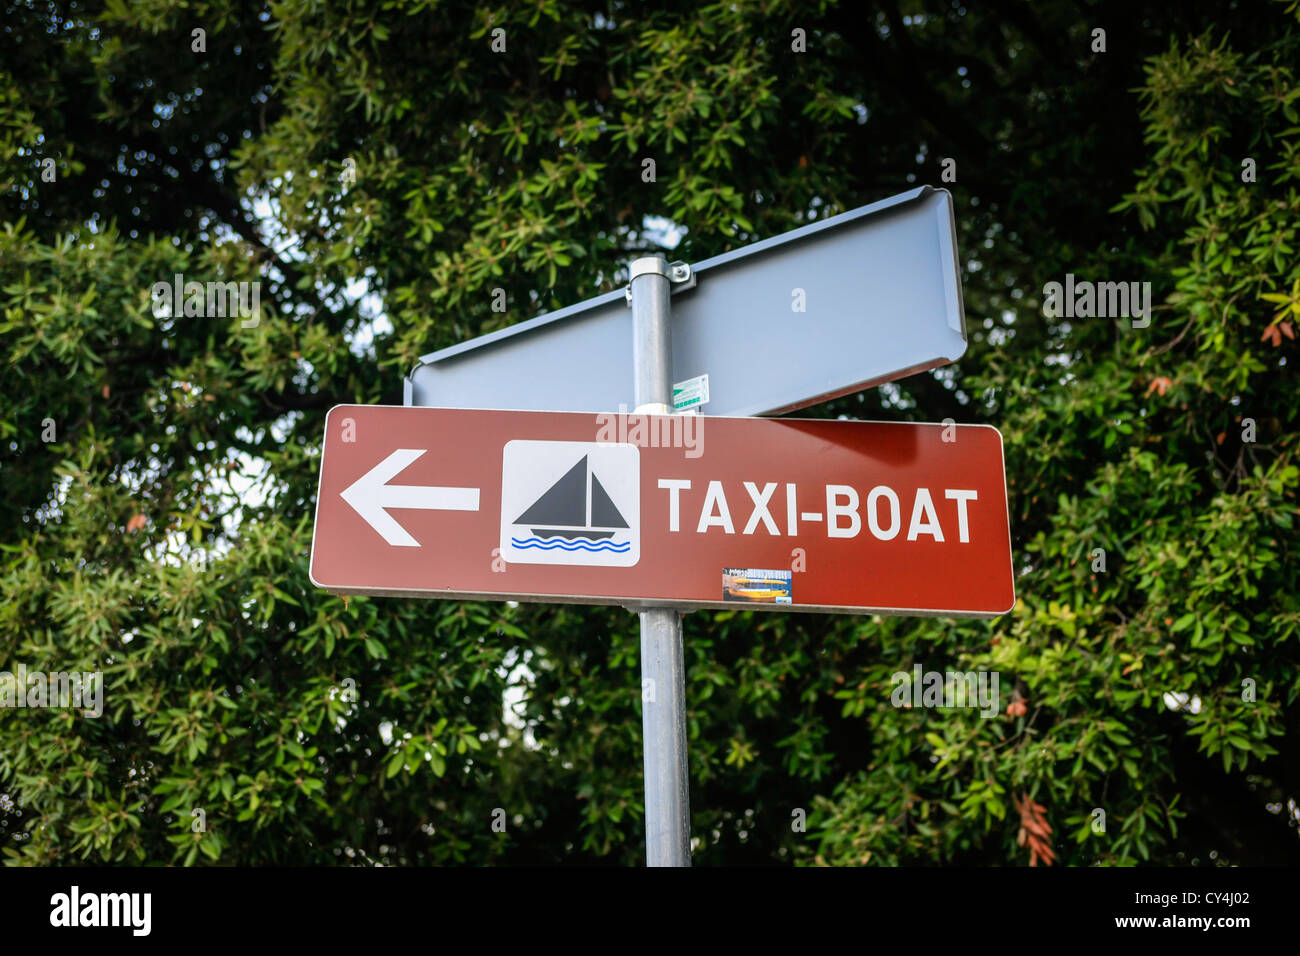 Signpost pointing to the Water Taxi-boat in Opatija Croatia Stock Photo